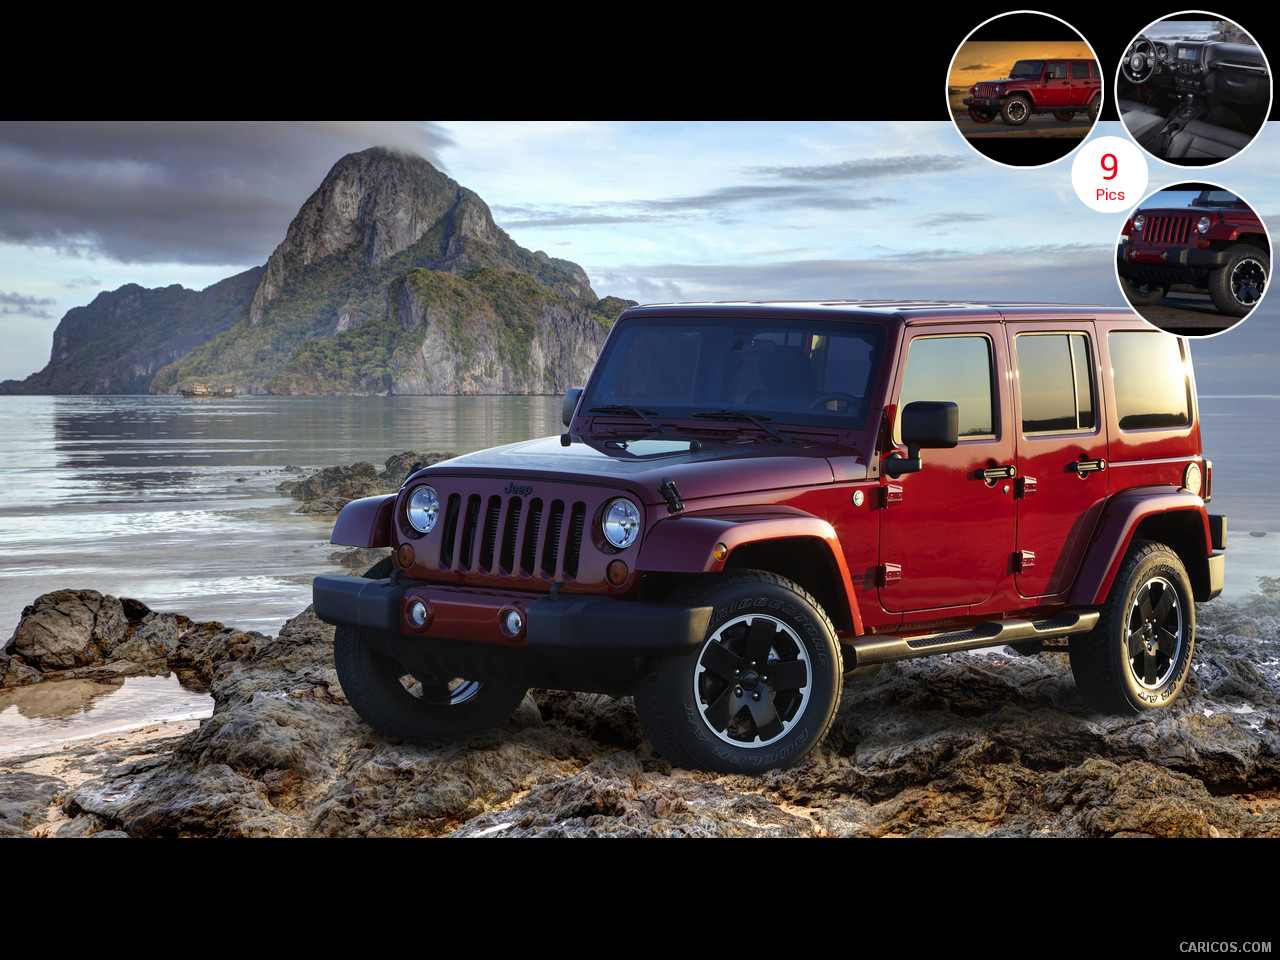 2013 Jeep Wrangler Unlimited Altitude - Front | Wallpaper #4 ...